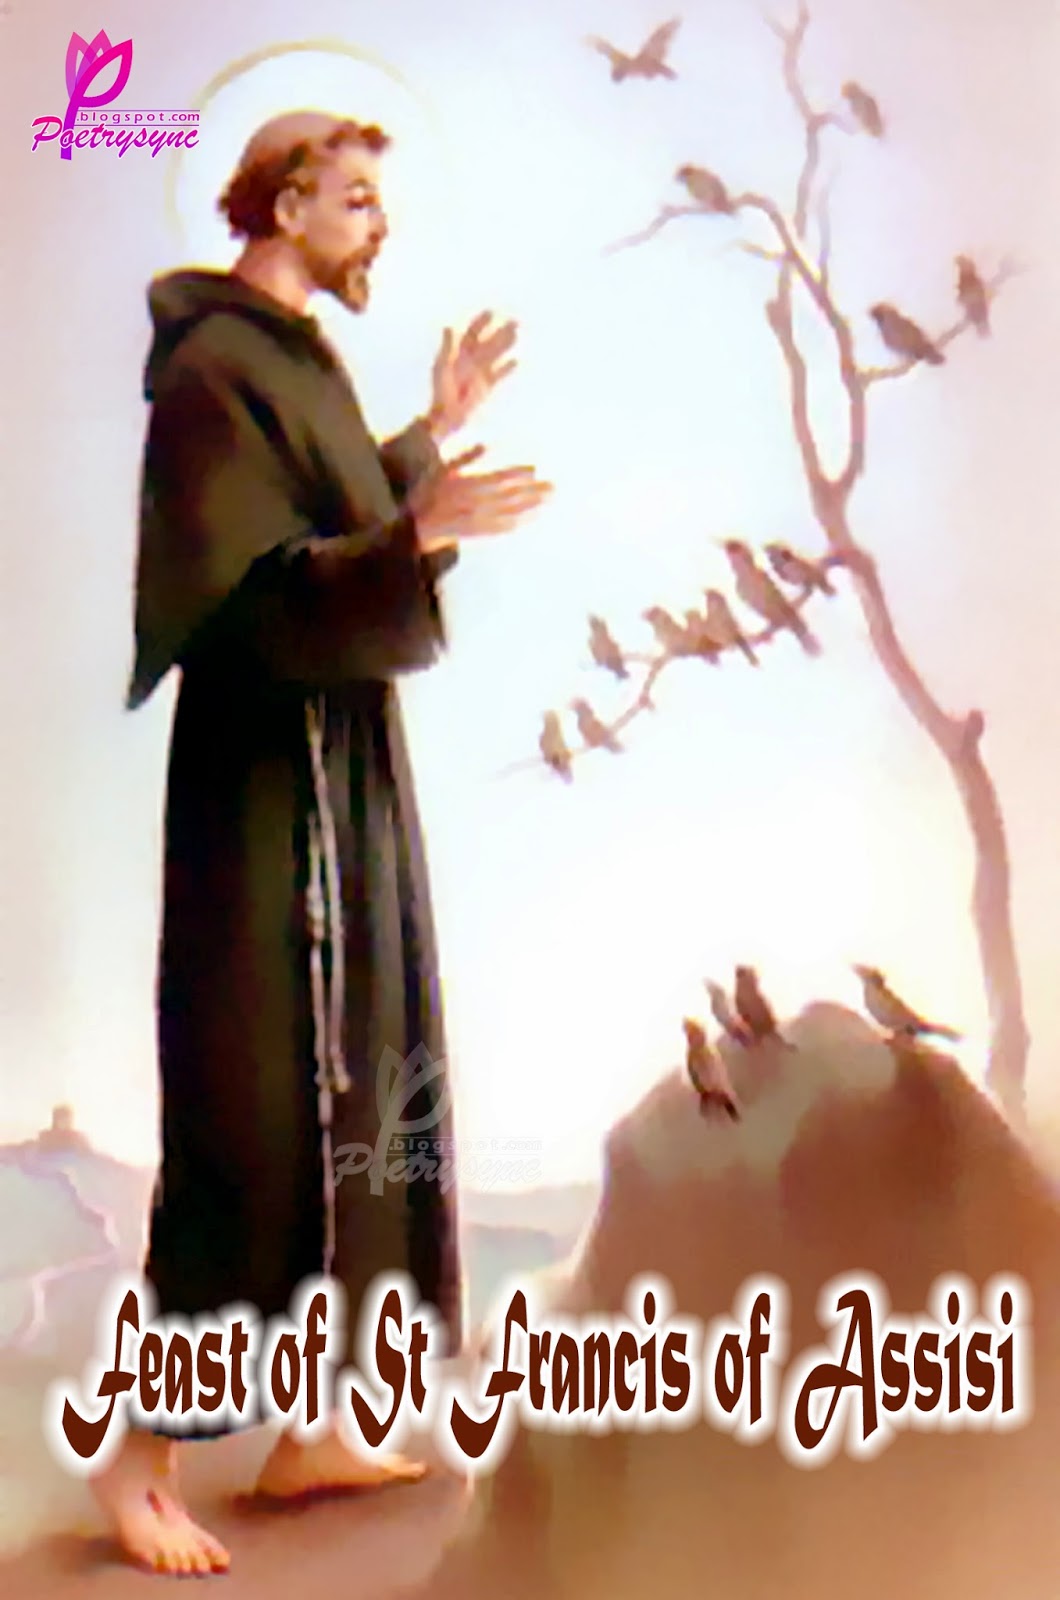 Francis of Assisi Quotes. QuotesGram